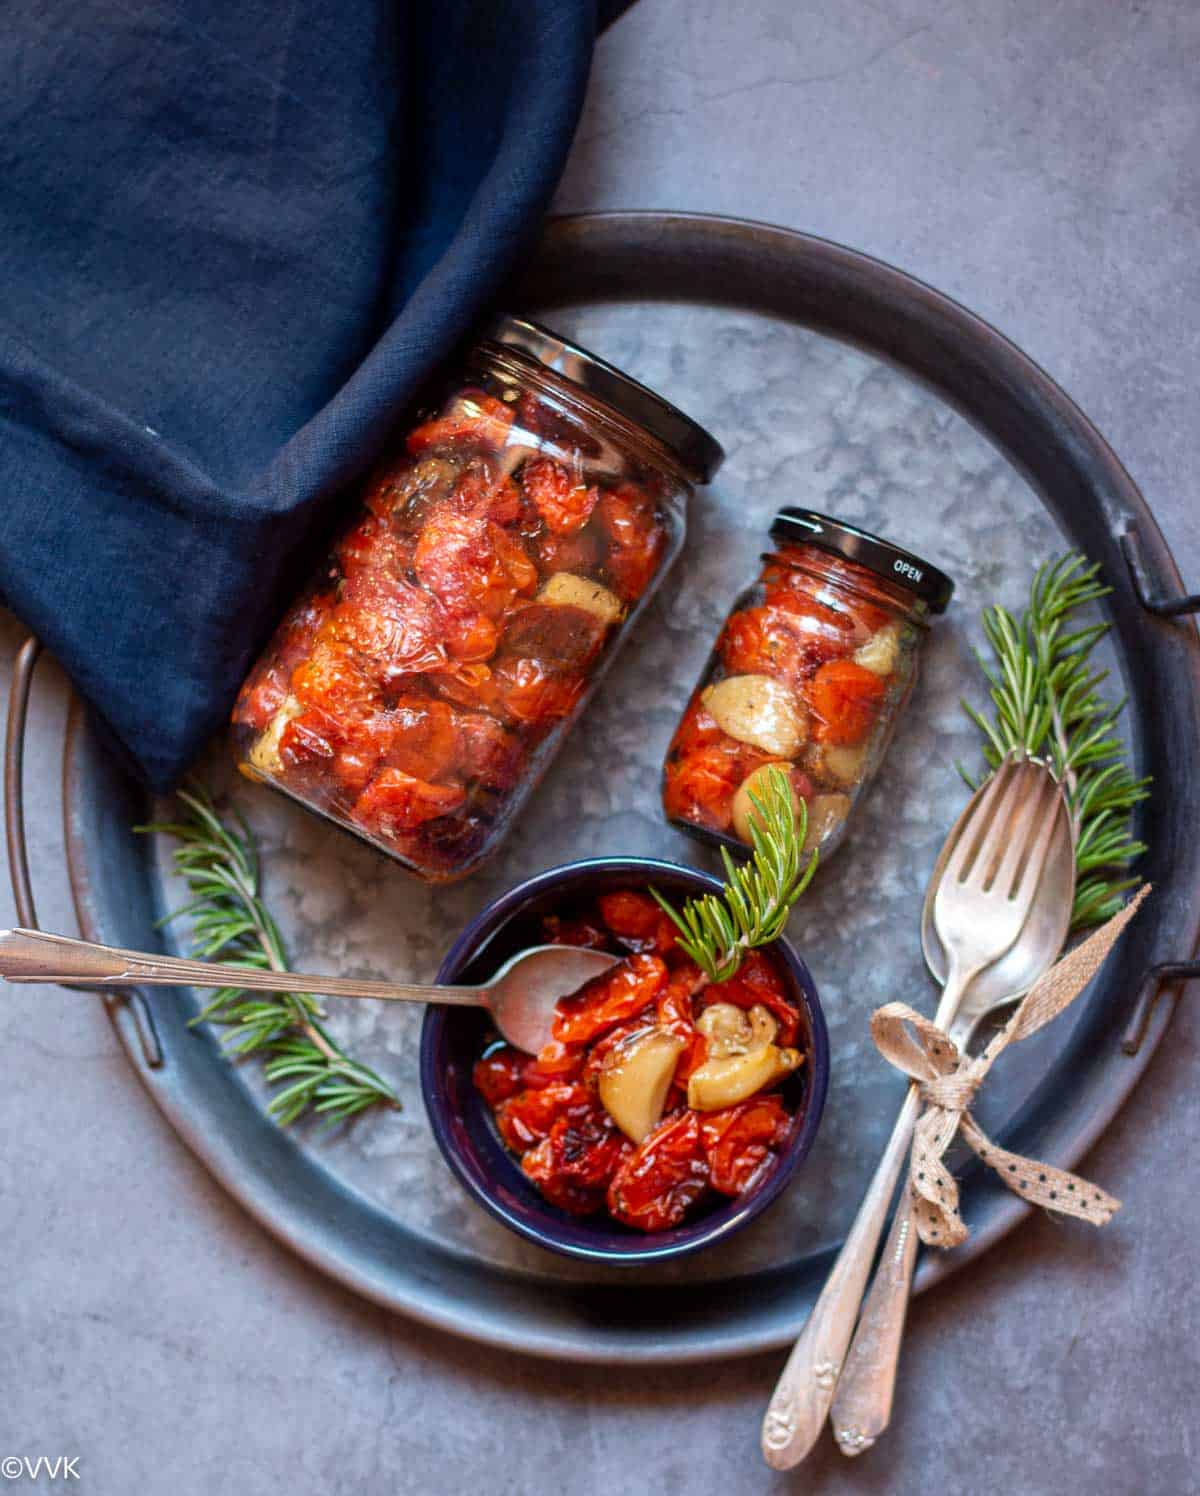 roasted tomatoes stored in jars and placed in black bowl on a iron tray with rosemary sprigs on the side